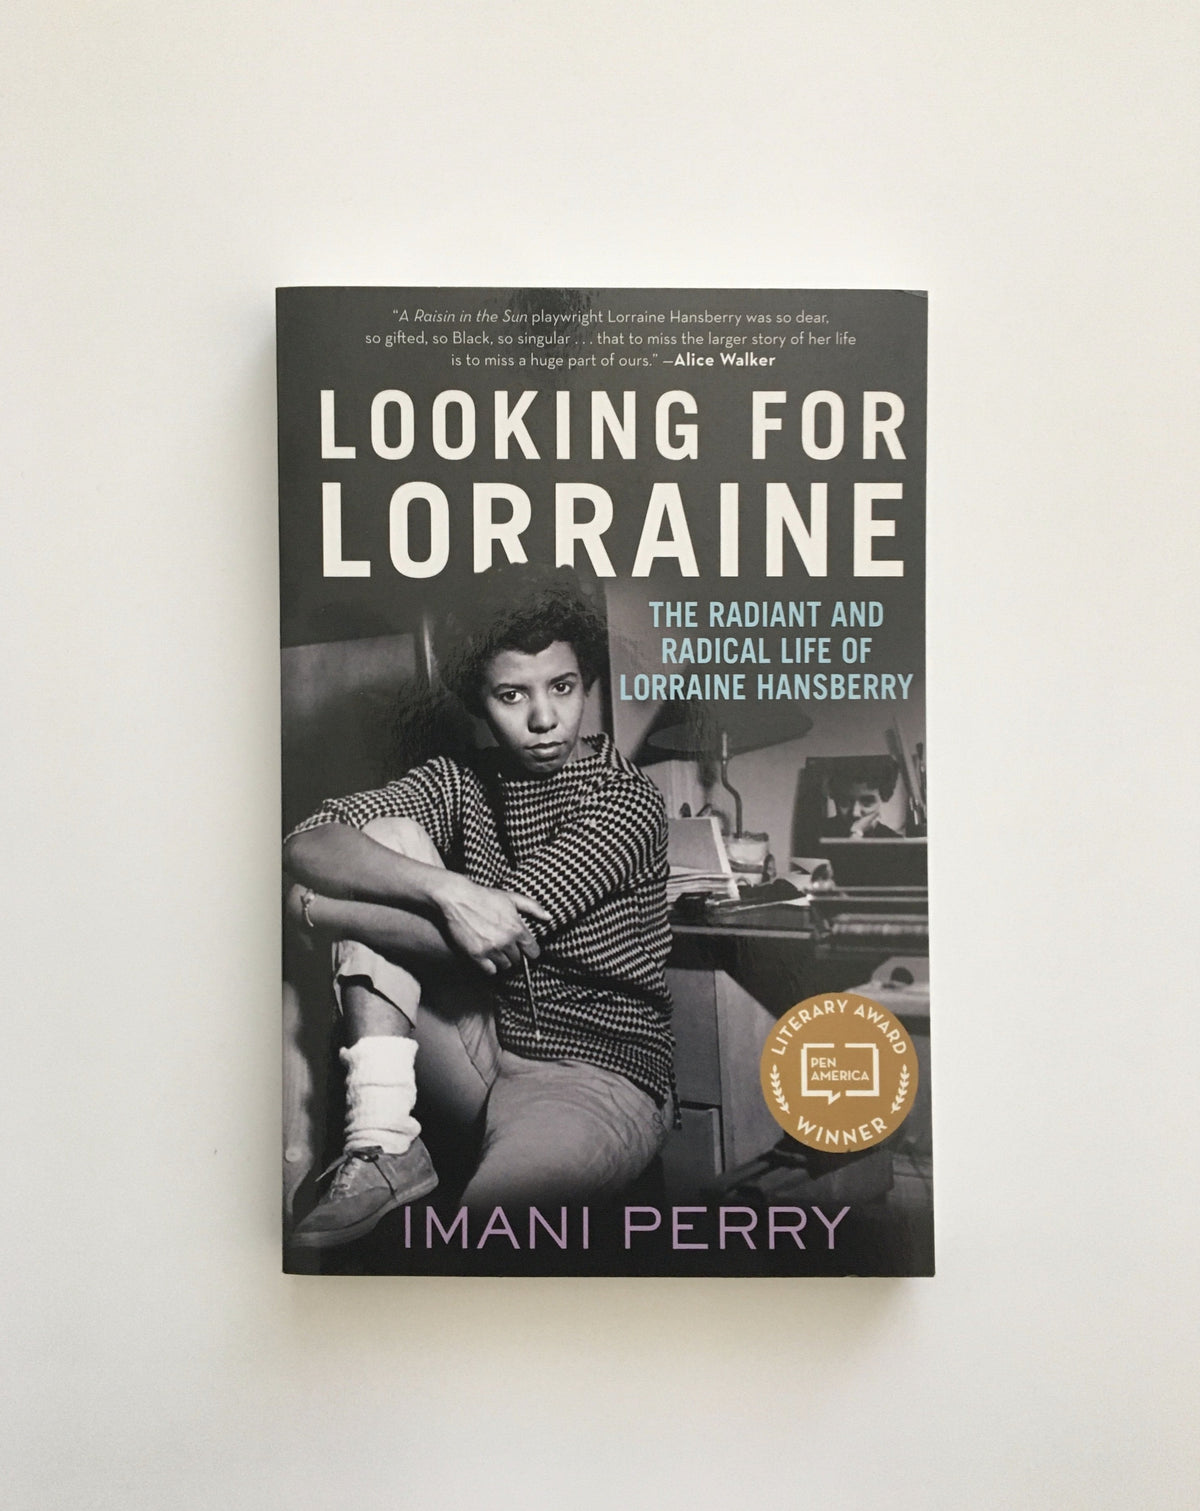 Looking for Lorraine by Imani Perry, book, Ten Dollar Books, Ten Dollar Books